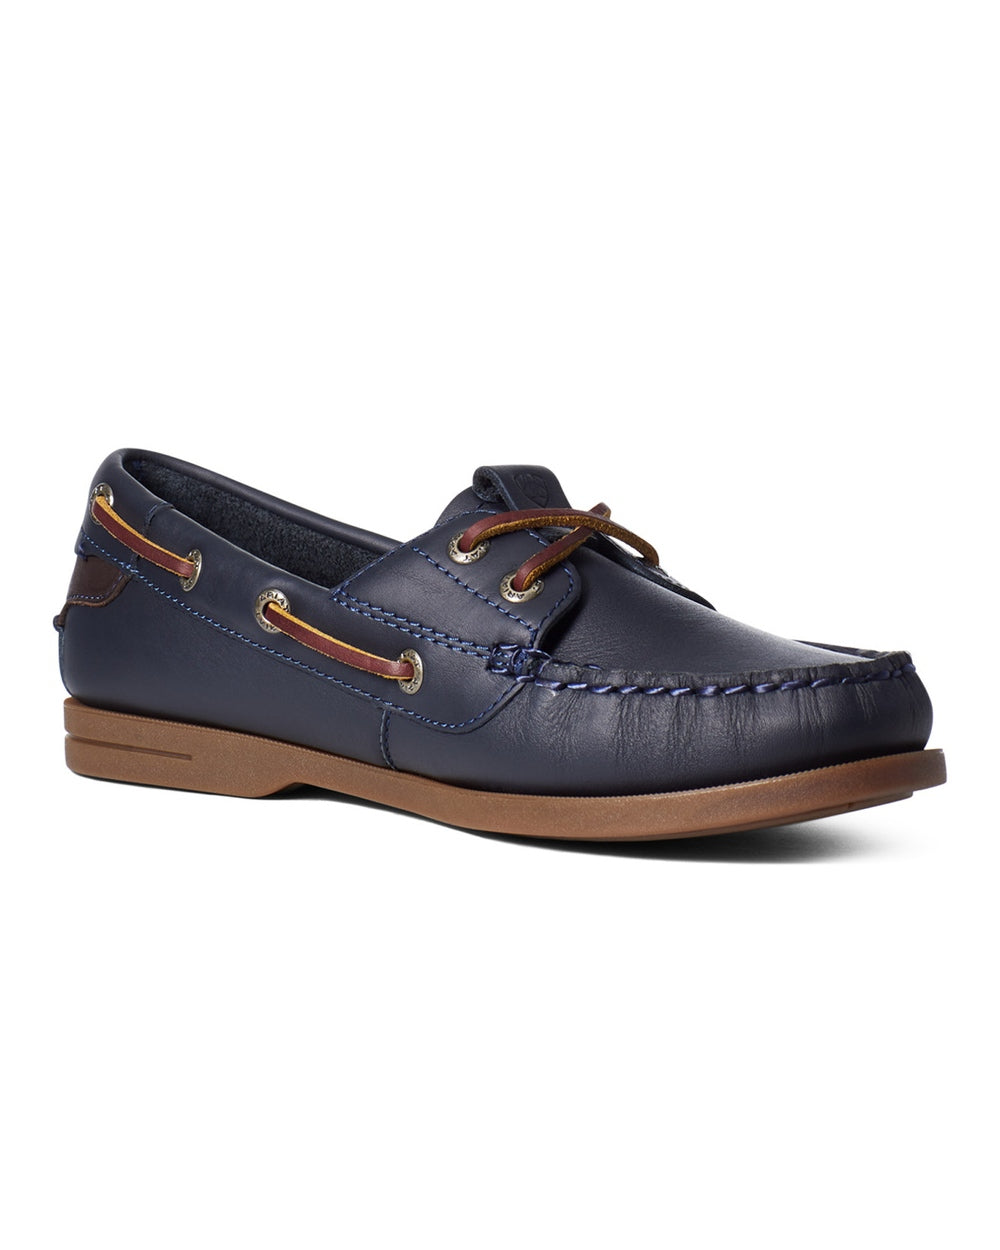 True Navy coloured Ariat Womens Antigua Boat Shoes on white background 